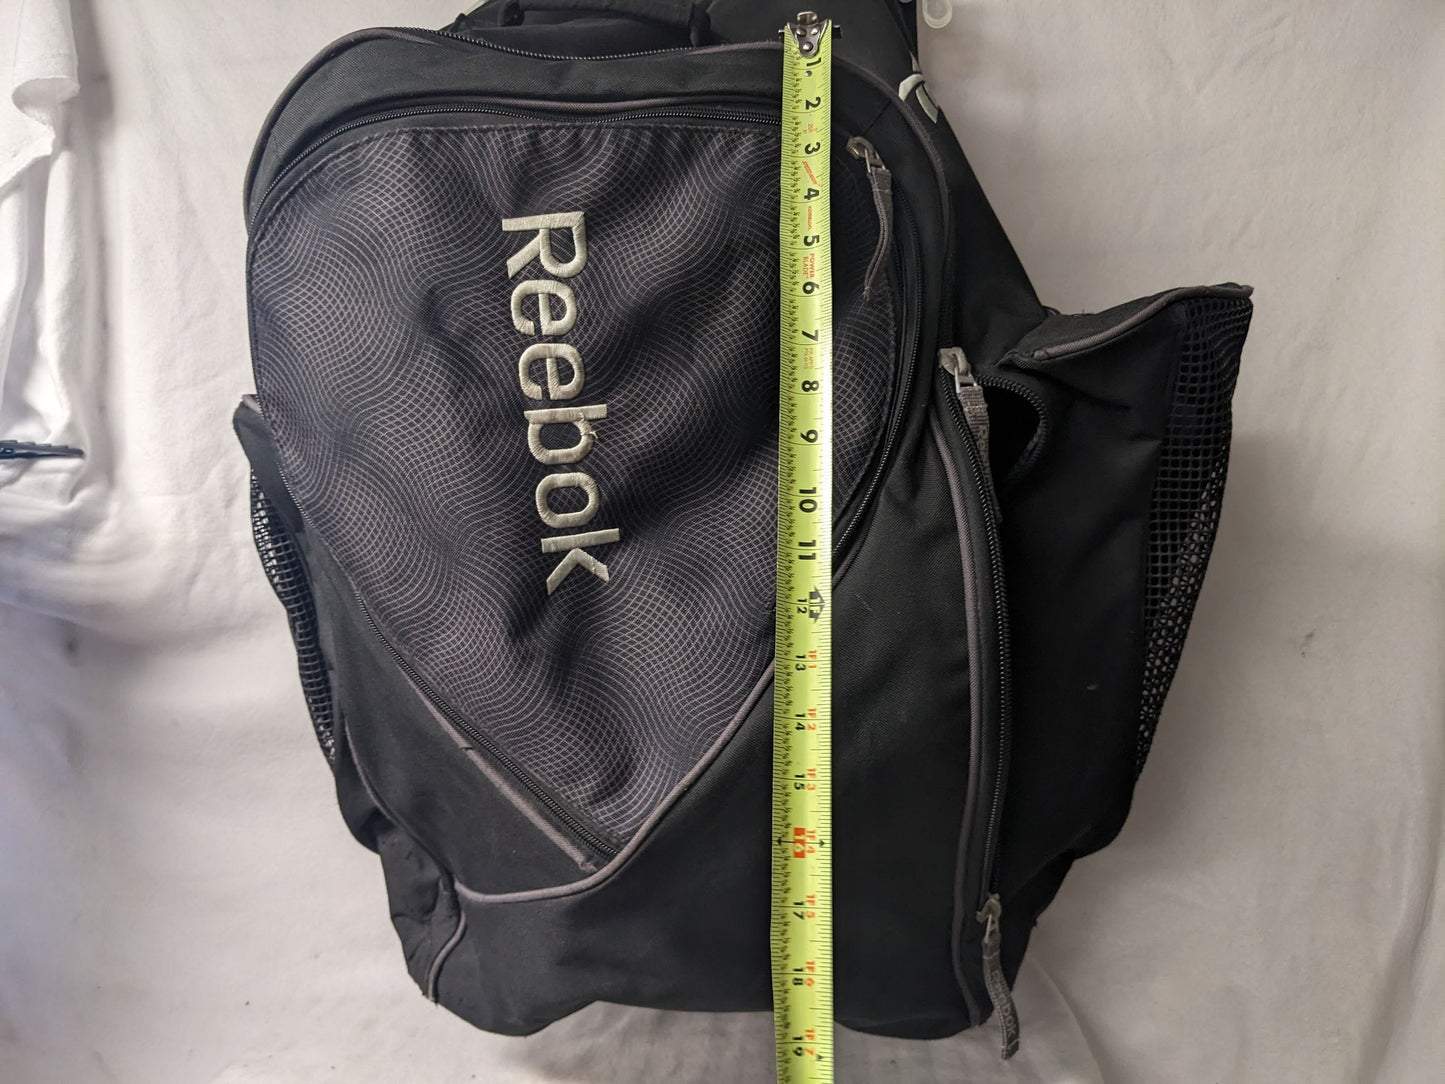 Reebok Hockey Gear Backpack/Duffle Bag Size Large Color Black Condition Used